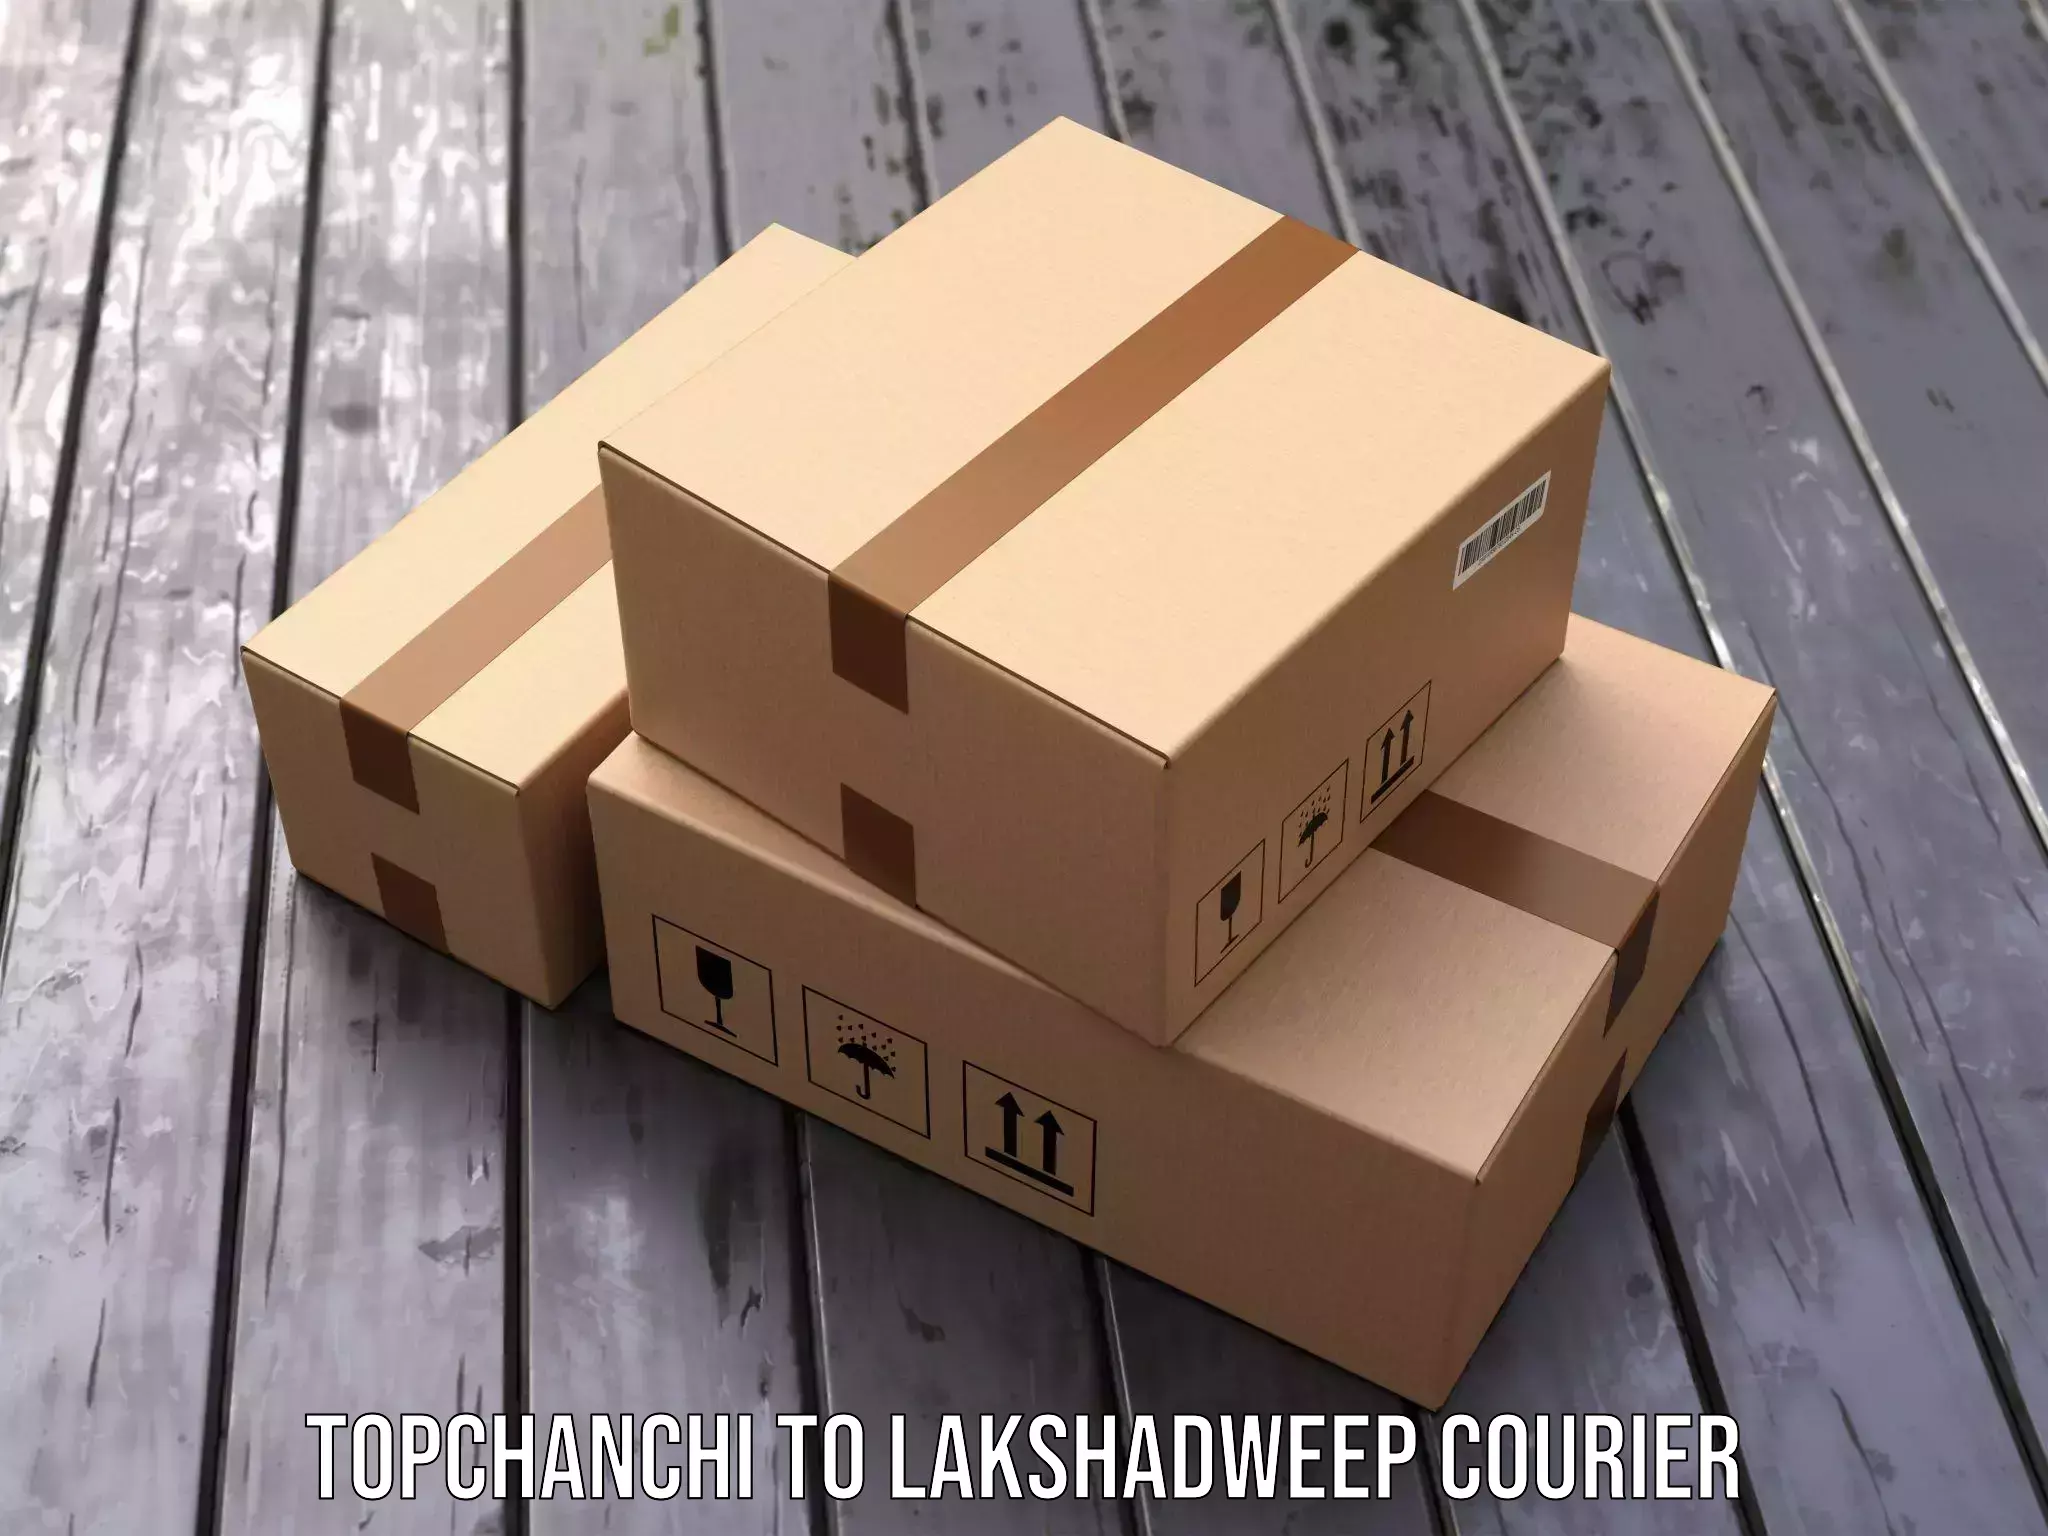 Full-service courier options Topchanchi to Lakshadweep